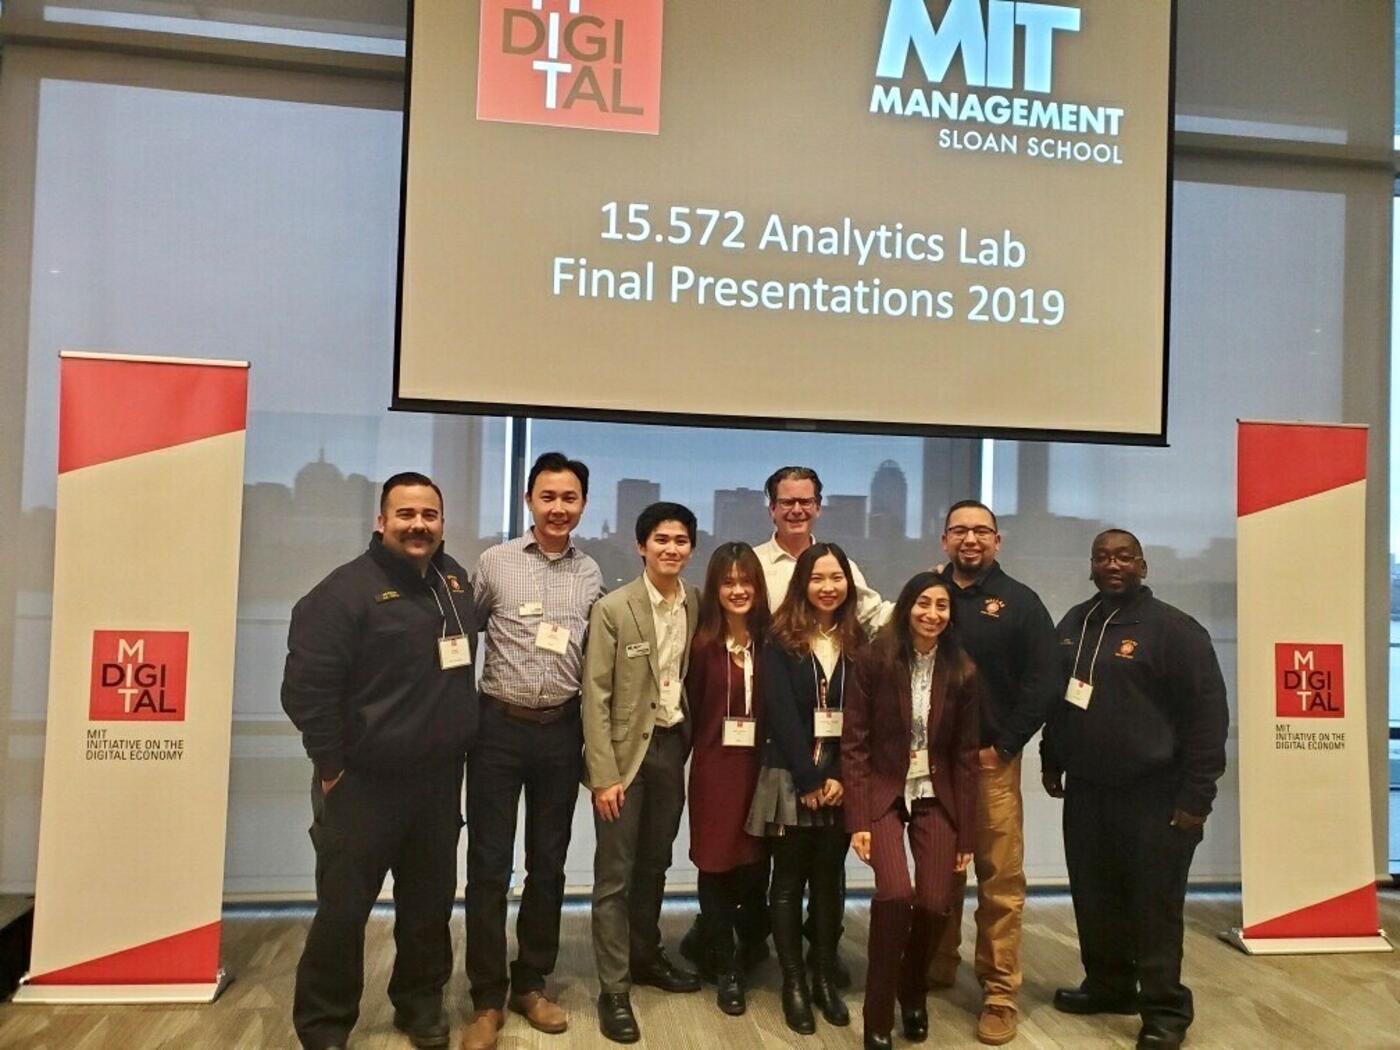 A-Lab Team and Dallas Fire and Rescue Department posing in front of presentation screen in Samberg Conference Room, MIT Sloan campus